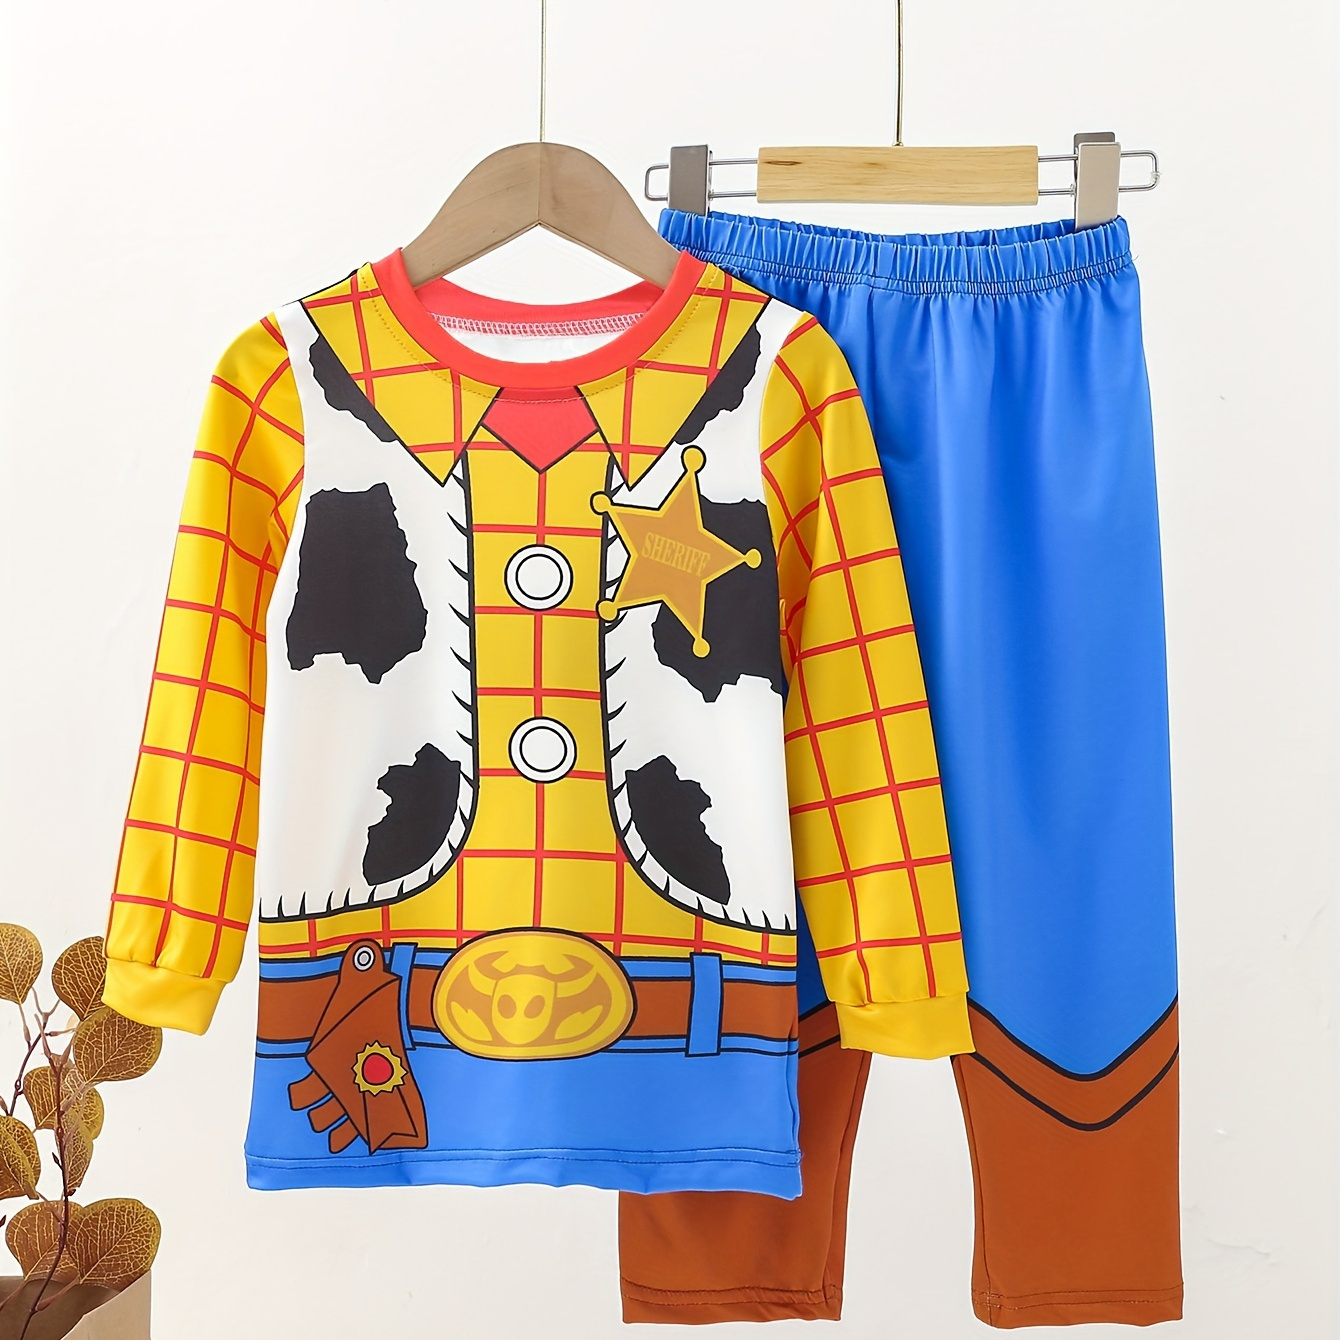 

Boy's Cartoon Cowboy Character Clothing, Halloween 3d Print Top & Pants Set, Kid's Outfit For Halloween Carnival Party